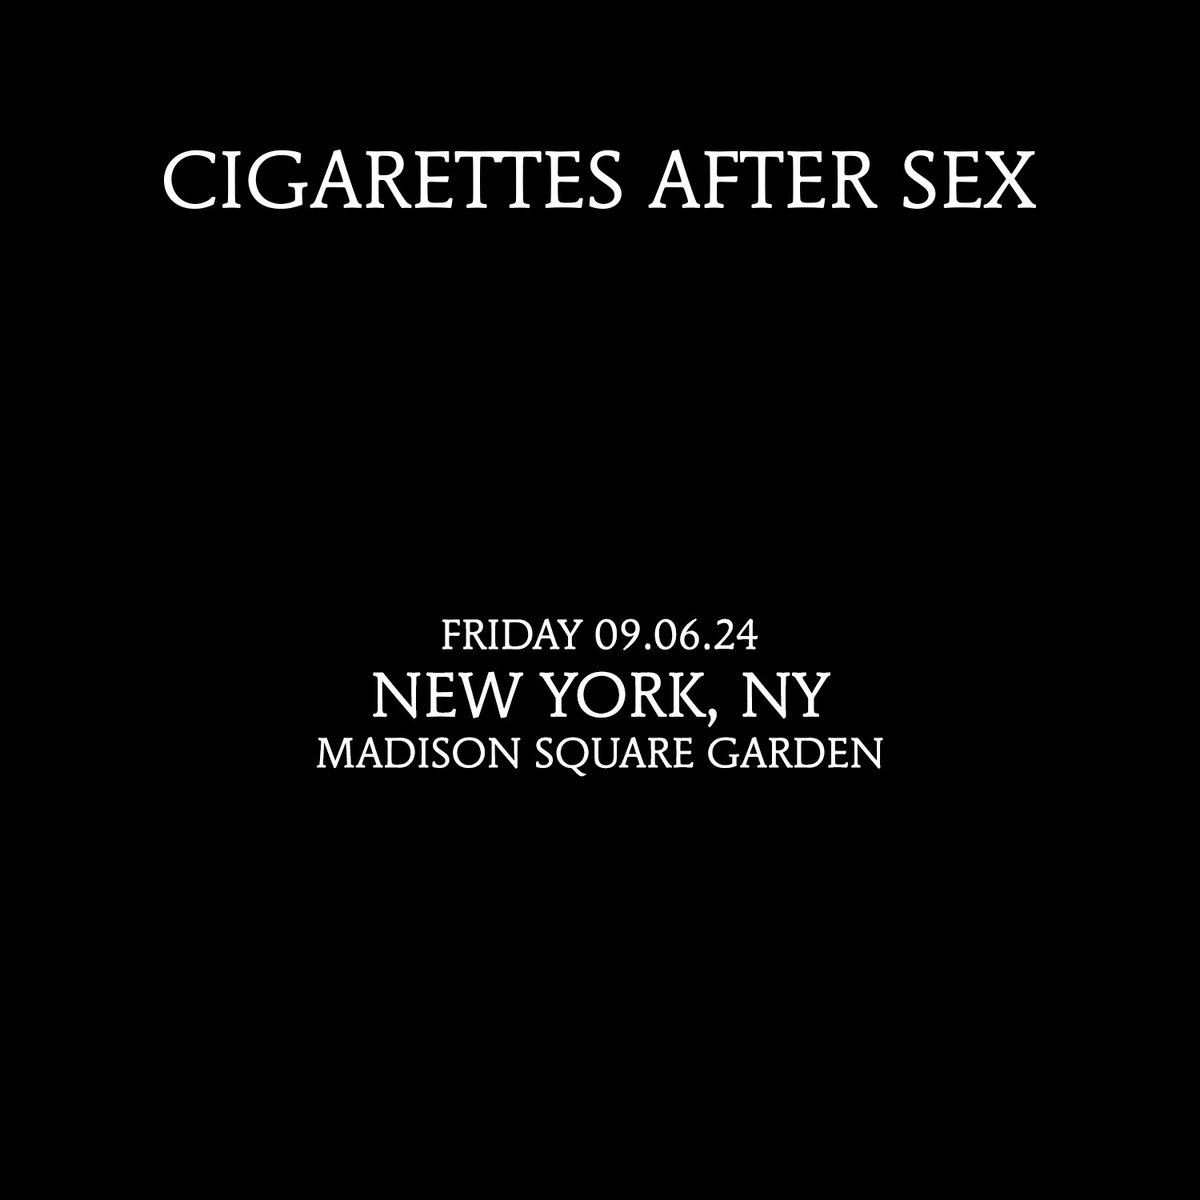 nyc sweetness. truly cannot wait for @TheGarden on september 6th. link below🖤… cigsaftersex.lnk.to/NY24